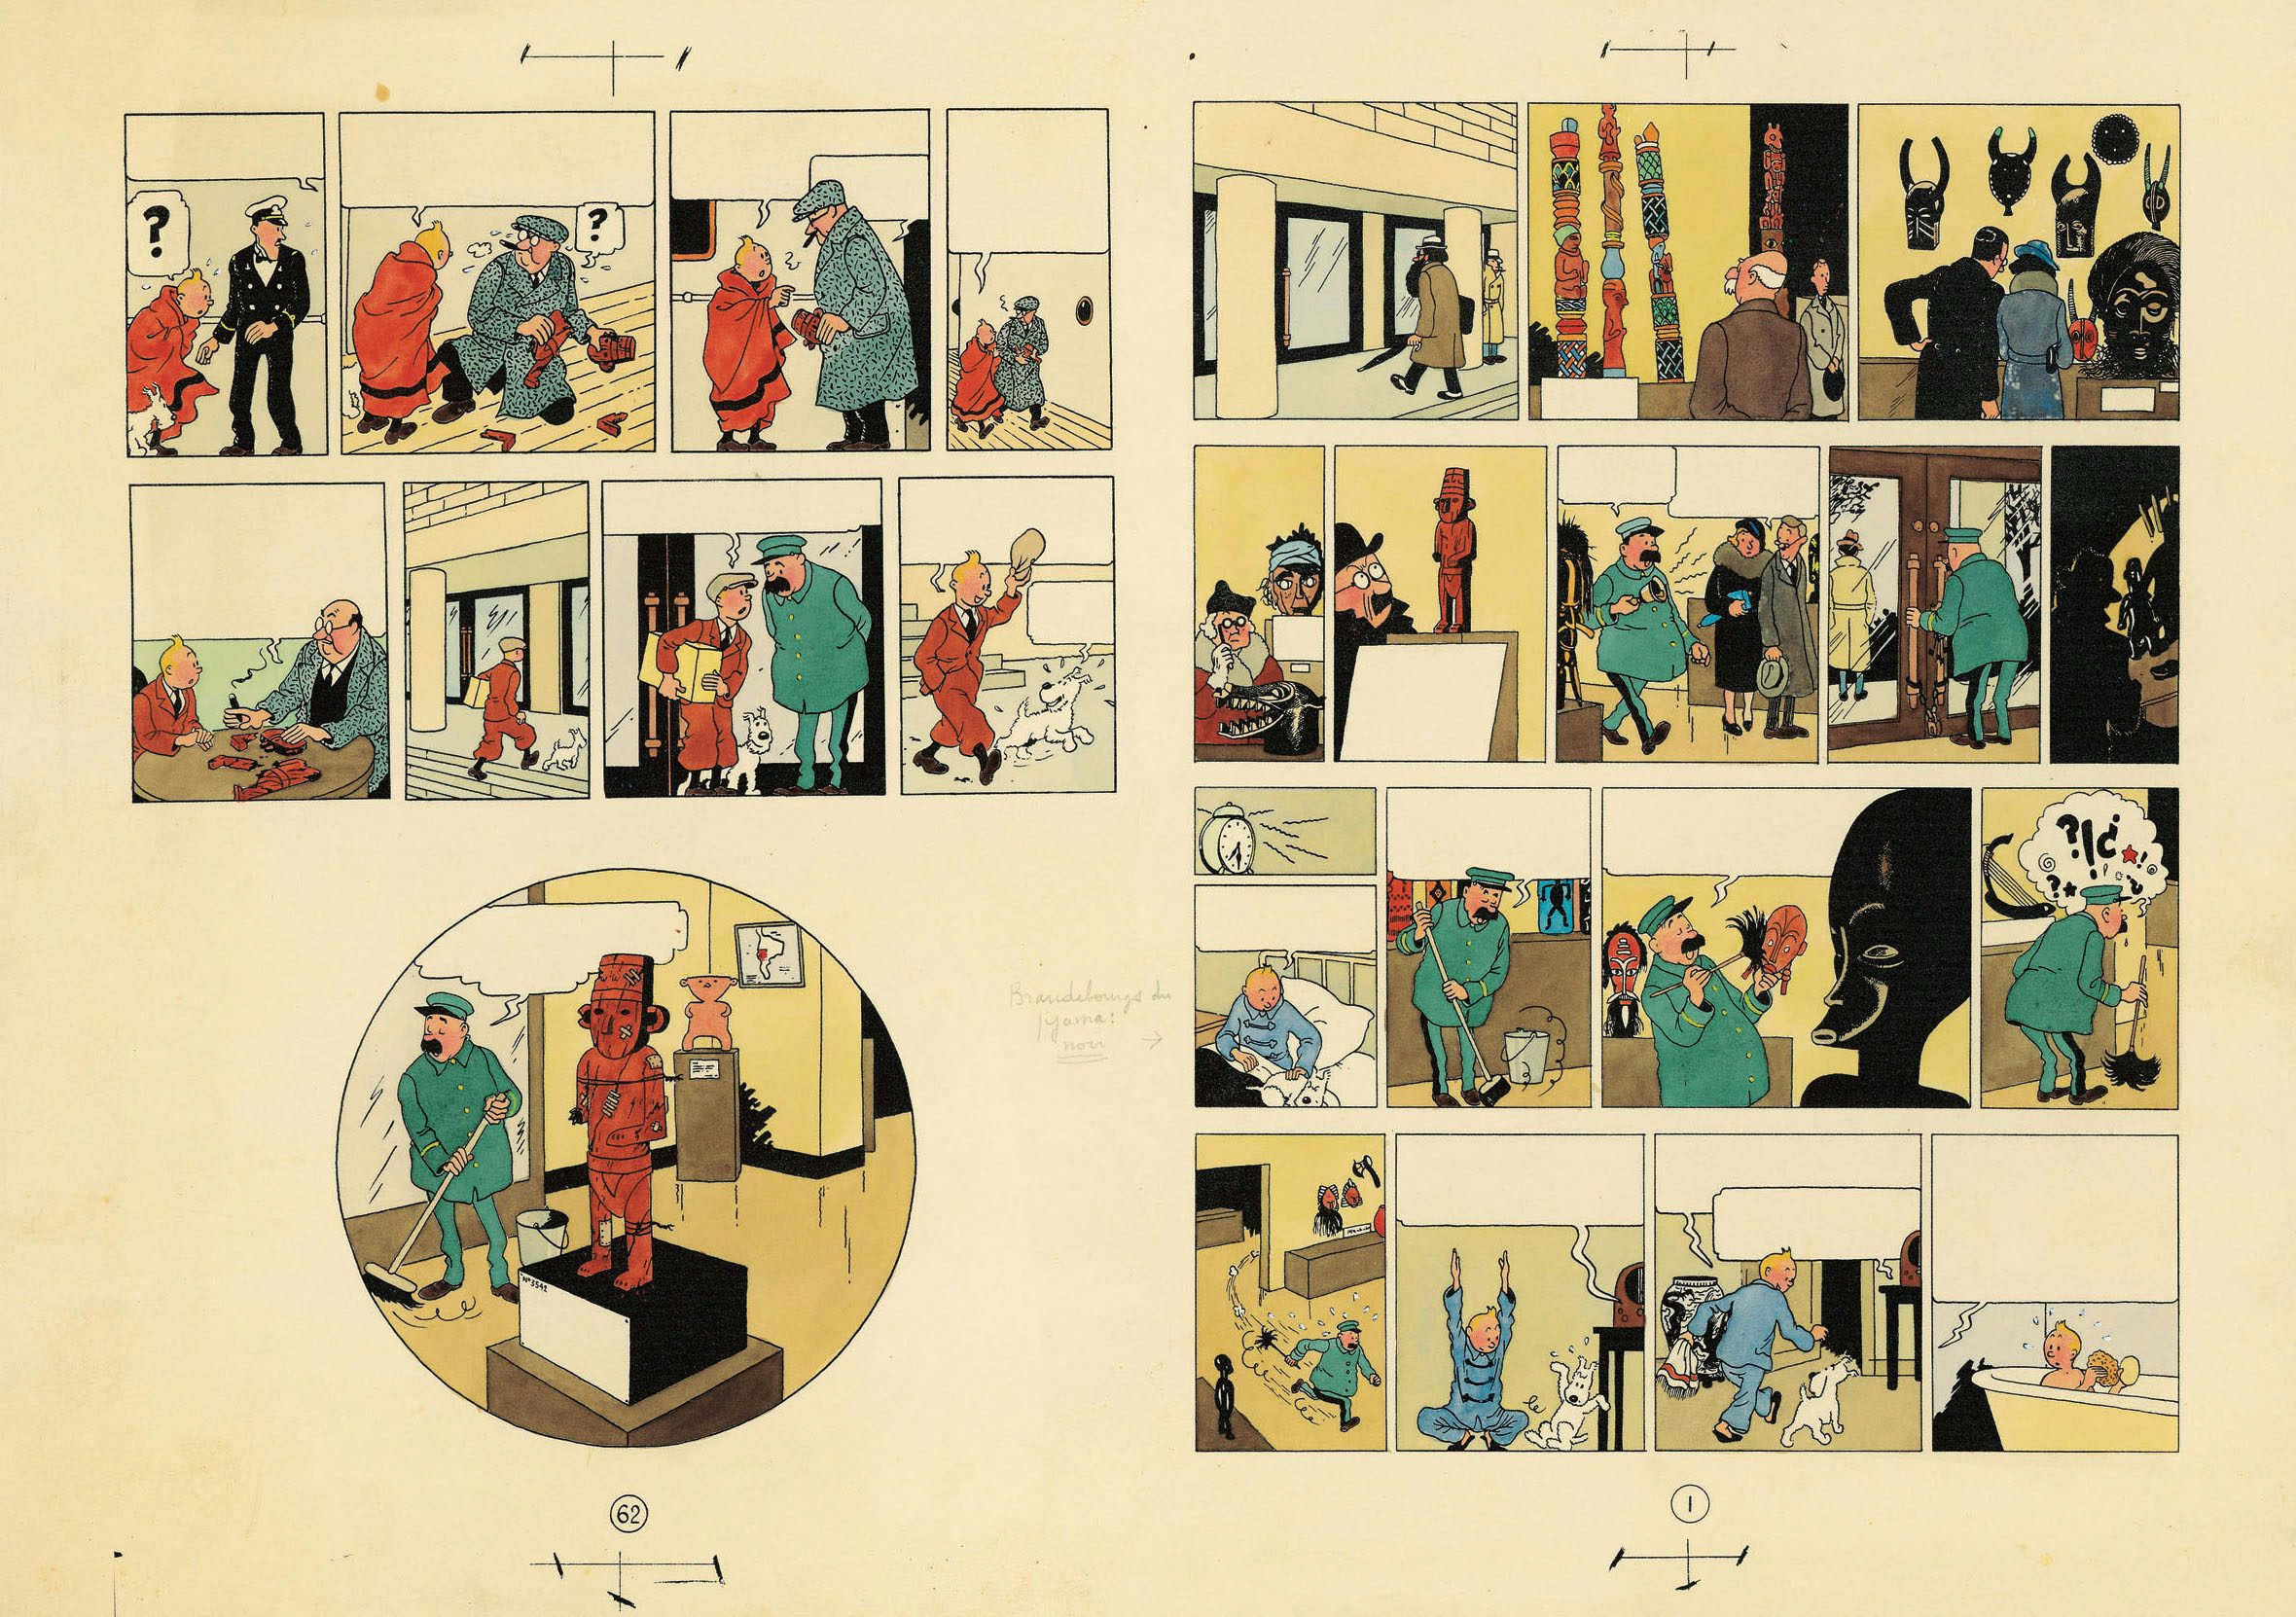 lue colouring for sheets 1 and 62 of Les Aventures de Tintin – L’Oreille cassée, 1956 (watercolour and gouache applied on printed proof).